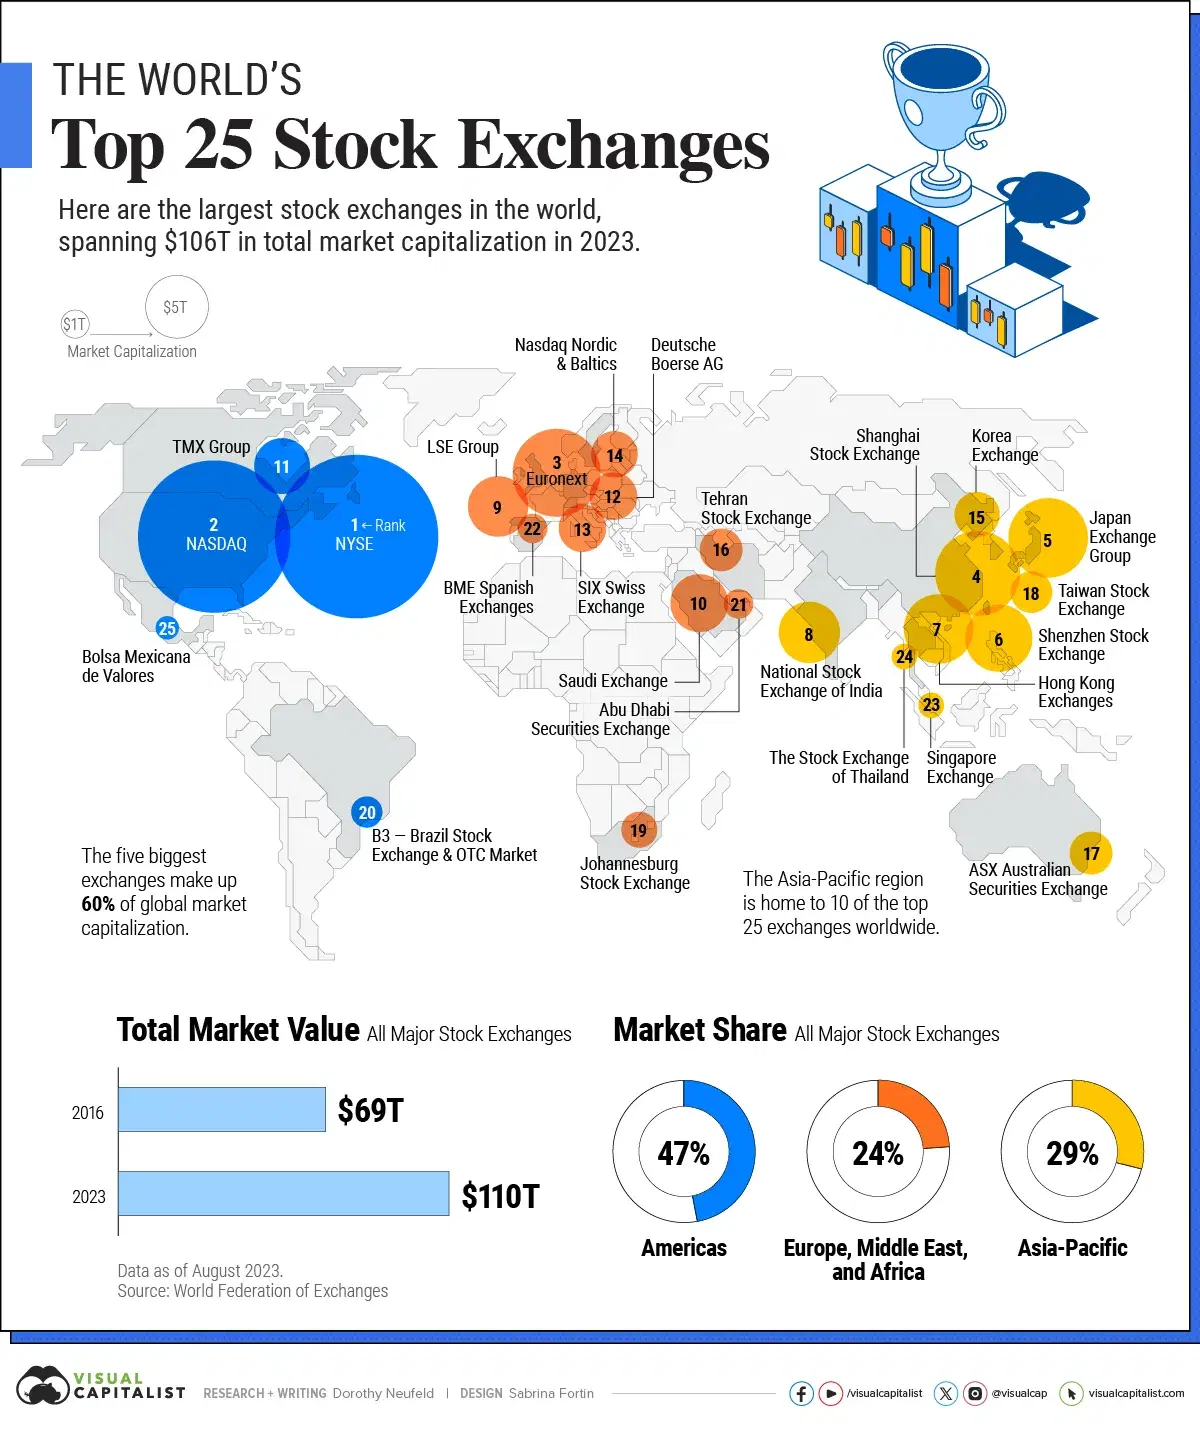 The World's Top 25 Stock Exchanges